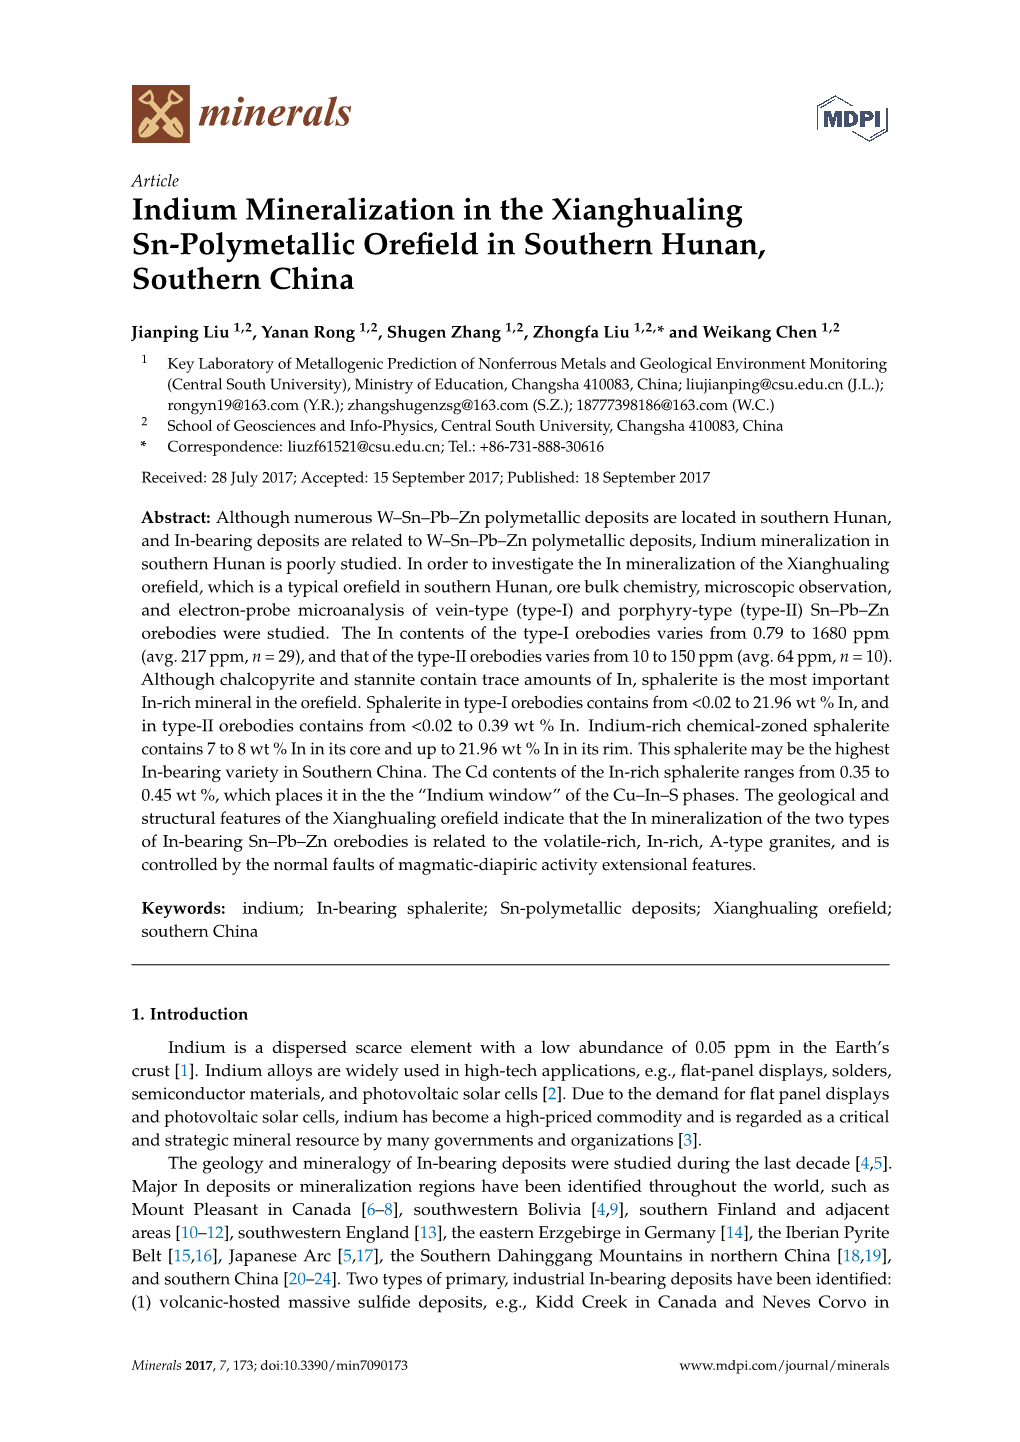 Indium Mineralization in the Xianghualing Sn-Polymetallic Oreﬁeld in Southern Hunan, Southern China